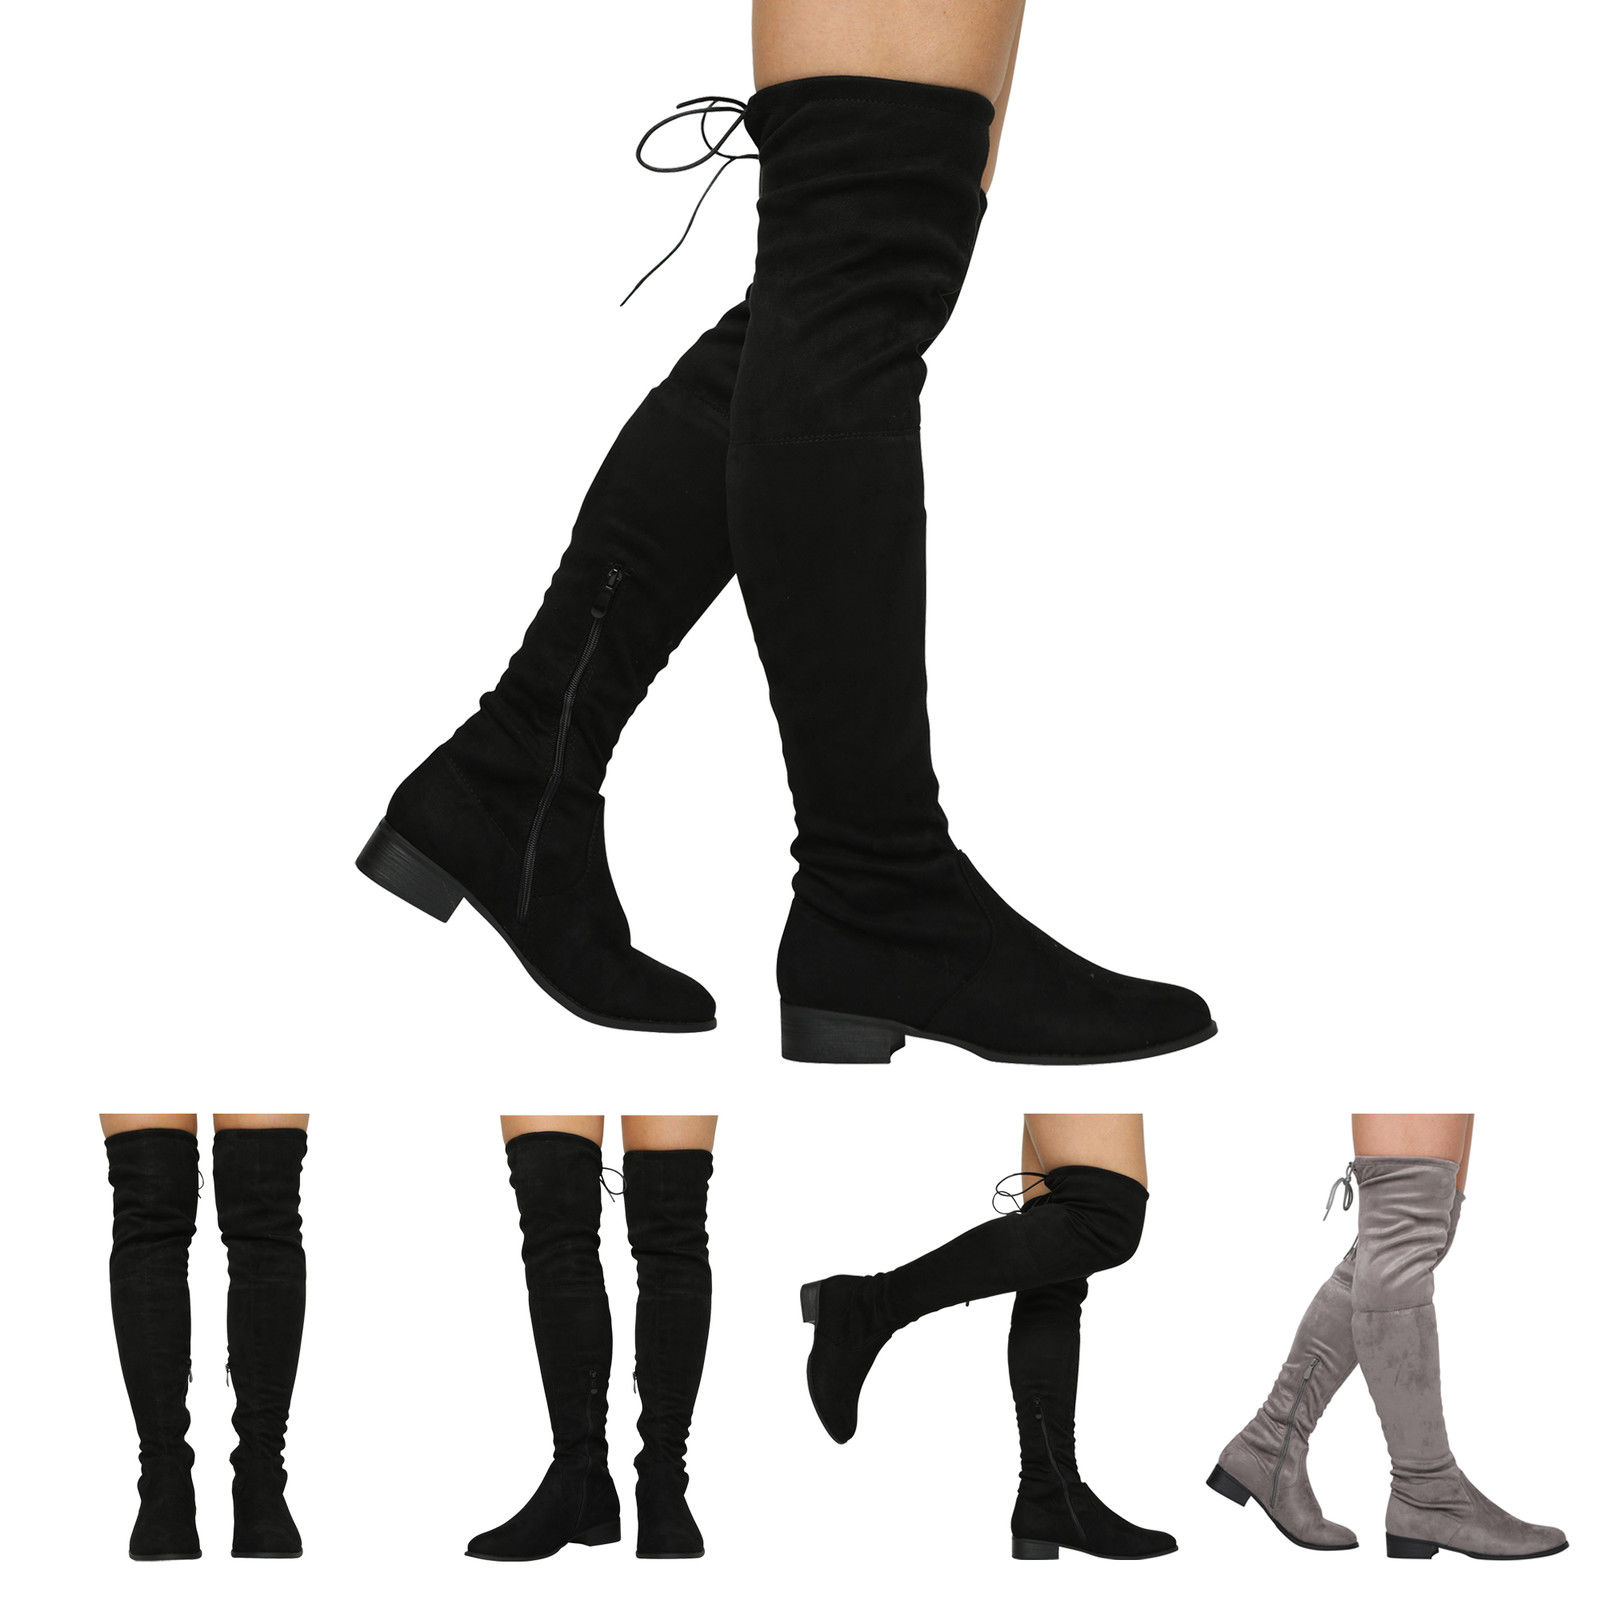 NEW WOMENS LADIES THIGH HIGH LOW HEEL OVER THE KNEE STRETCH BOOTS SIZE 3-8